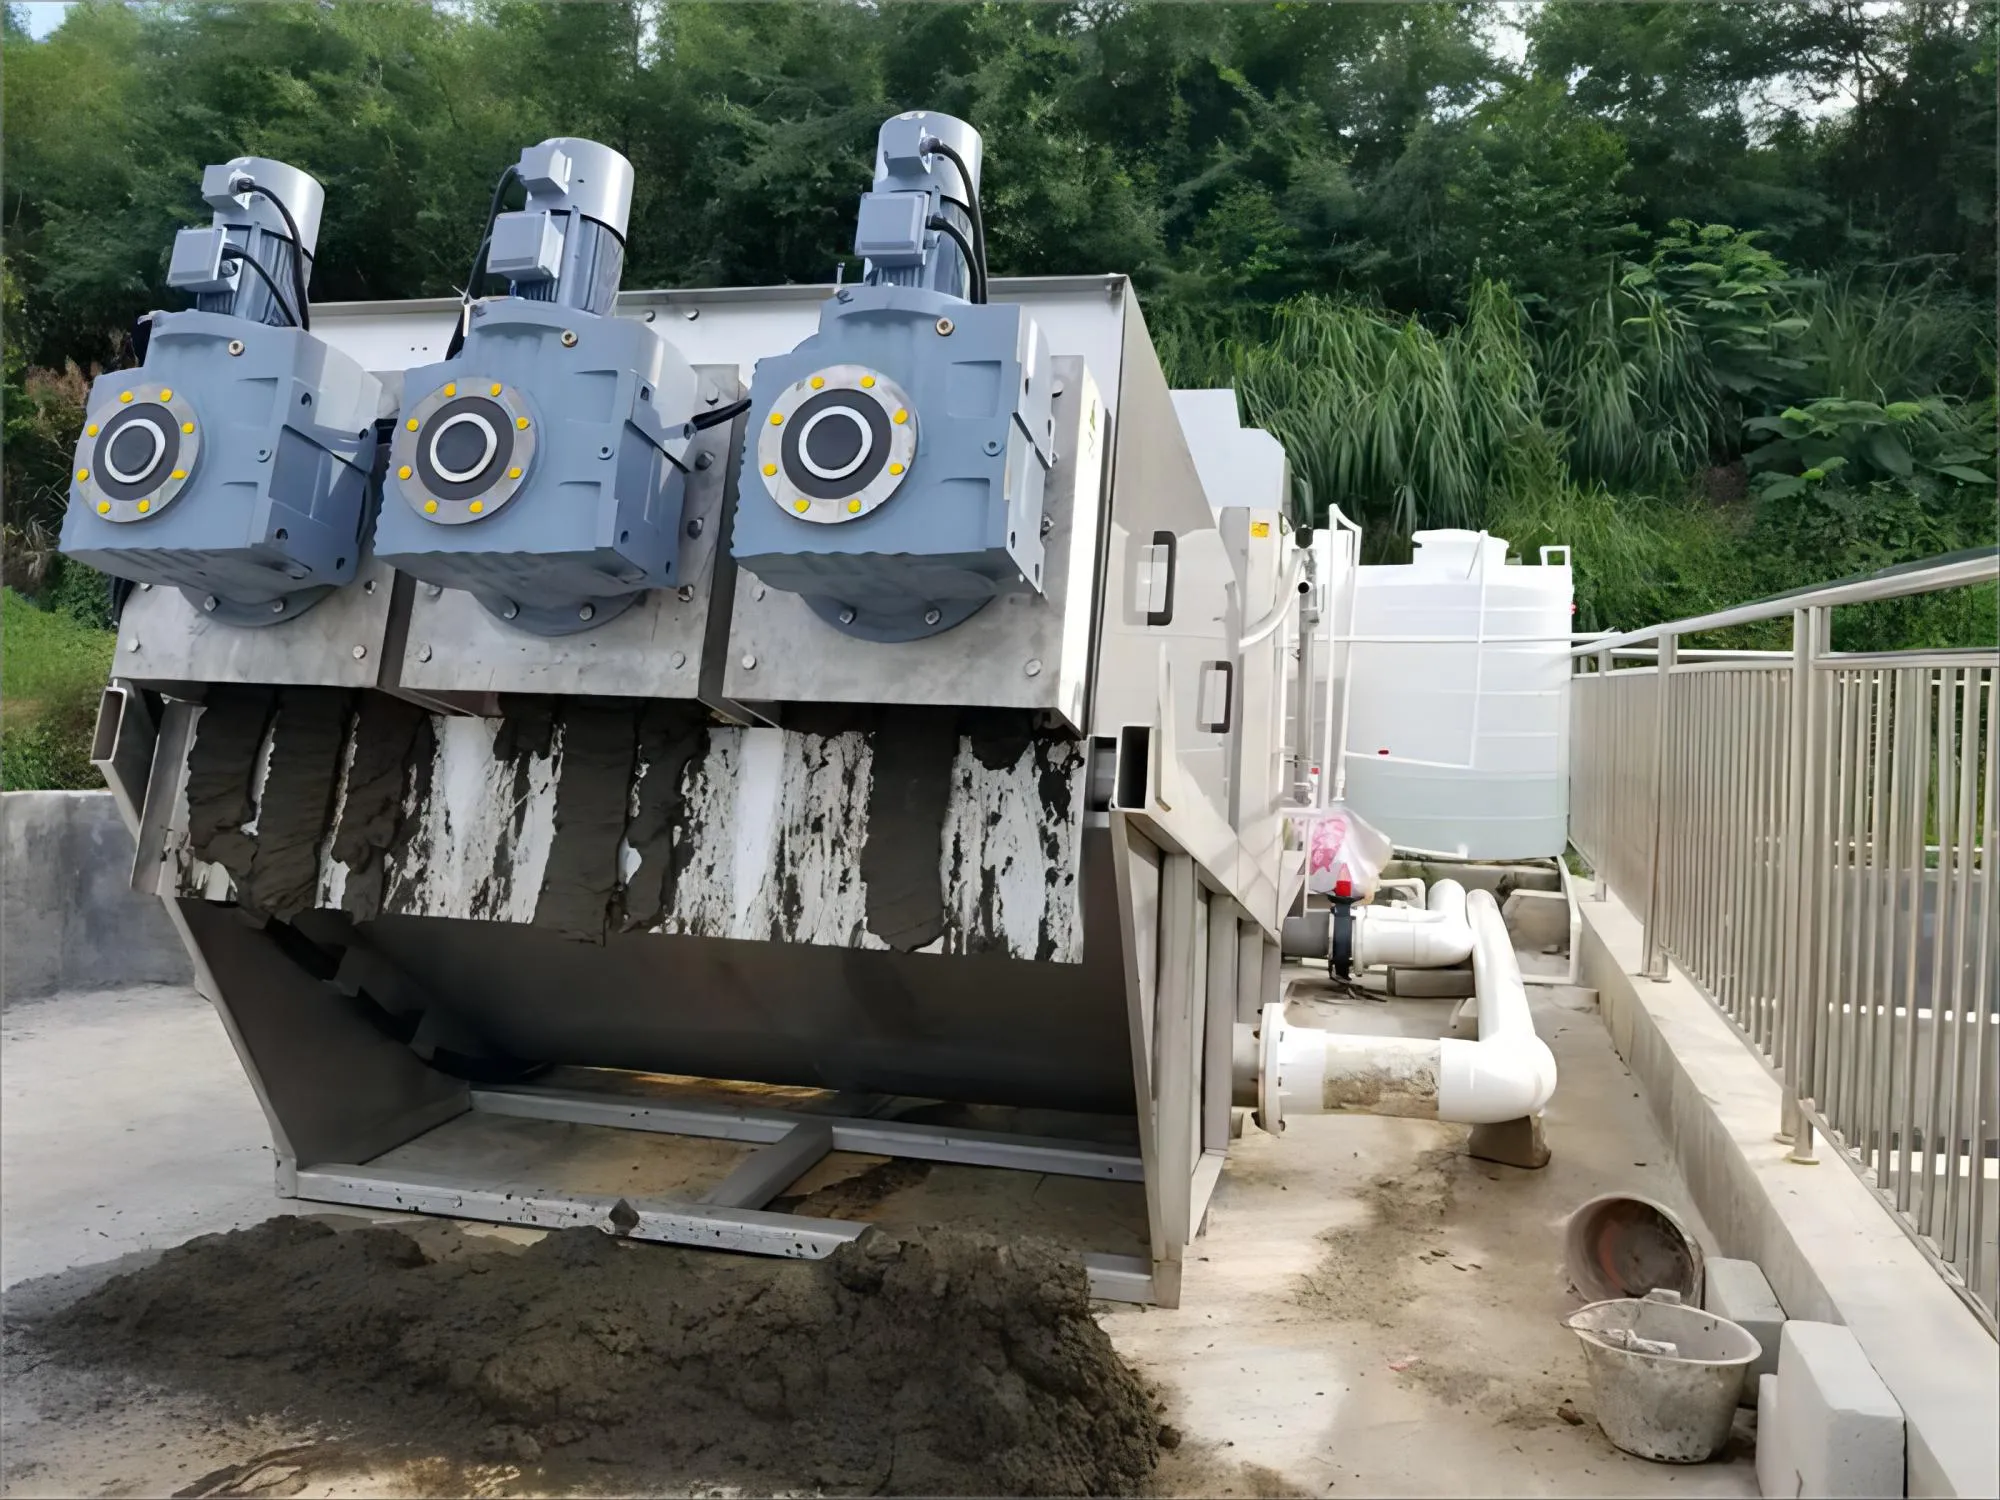 Our screw press dewatering machine liked by our clients, hot photo from clients just now...Liked!!!Check here: https://kopayintl.com/product/mul...